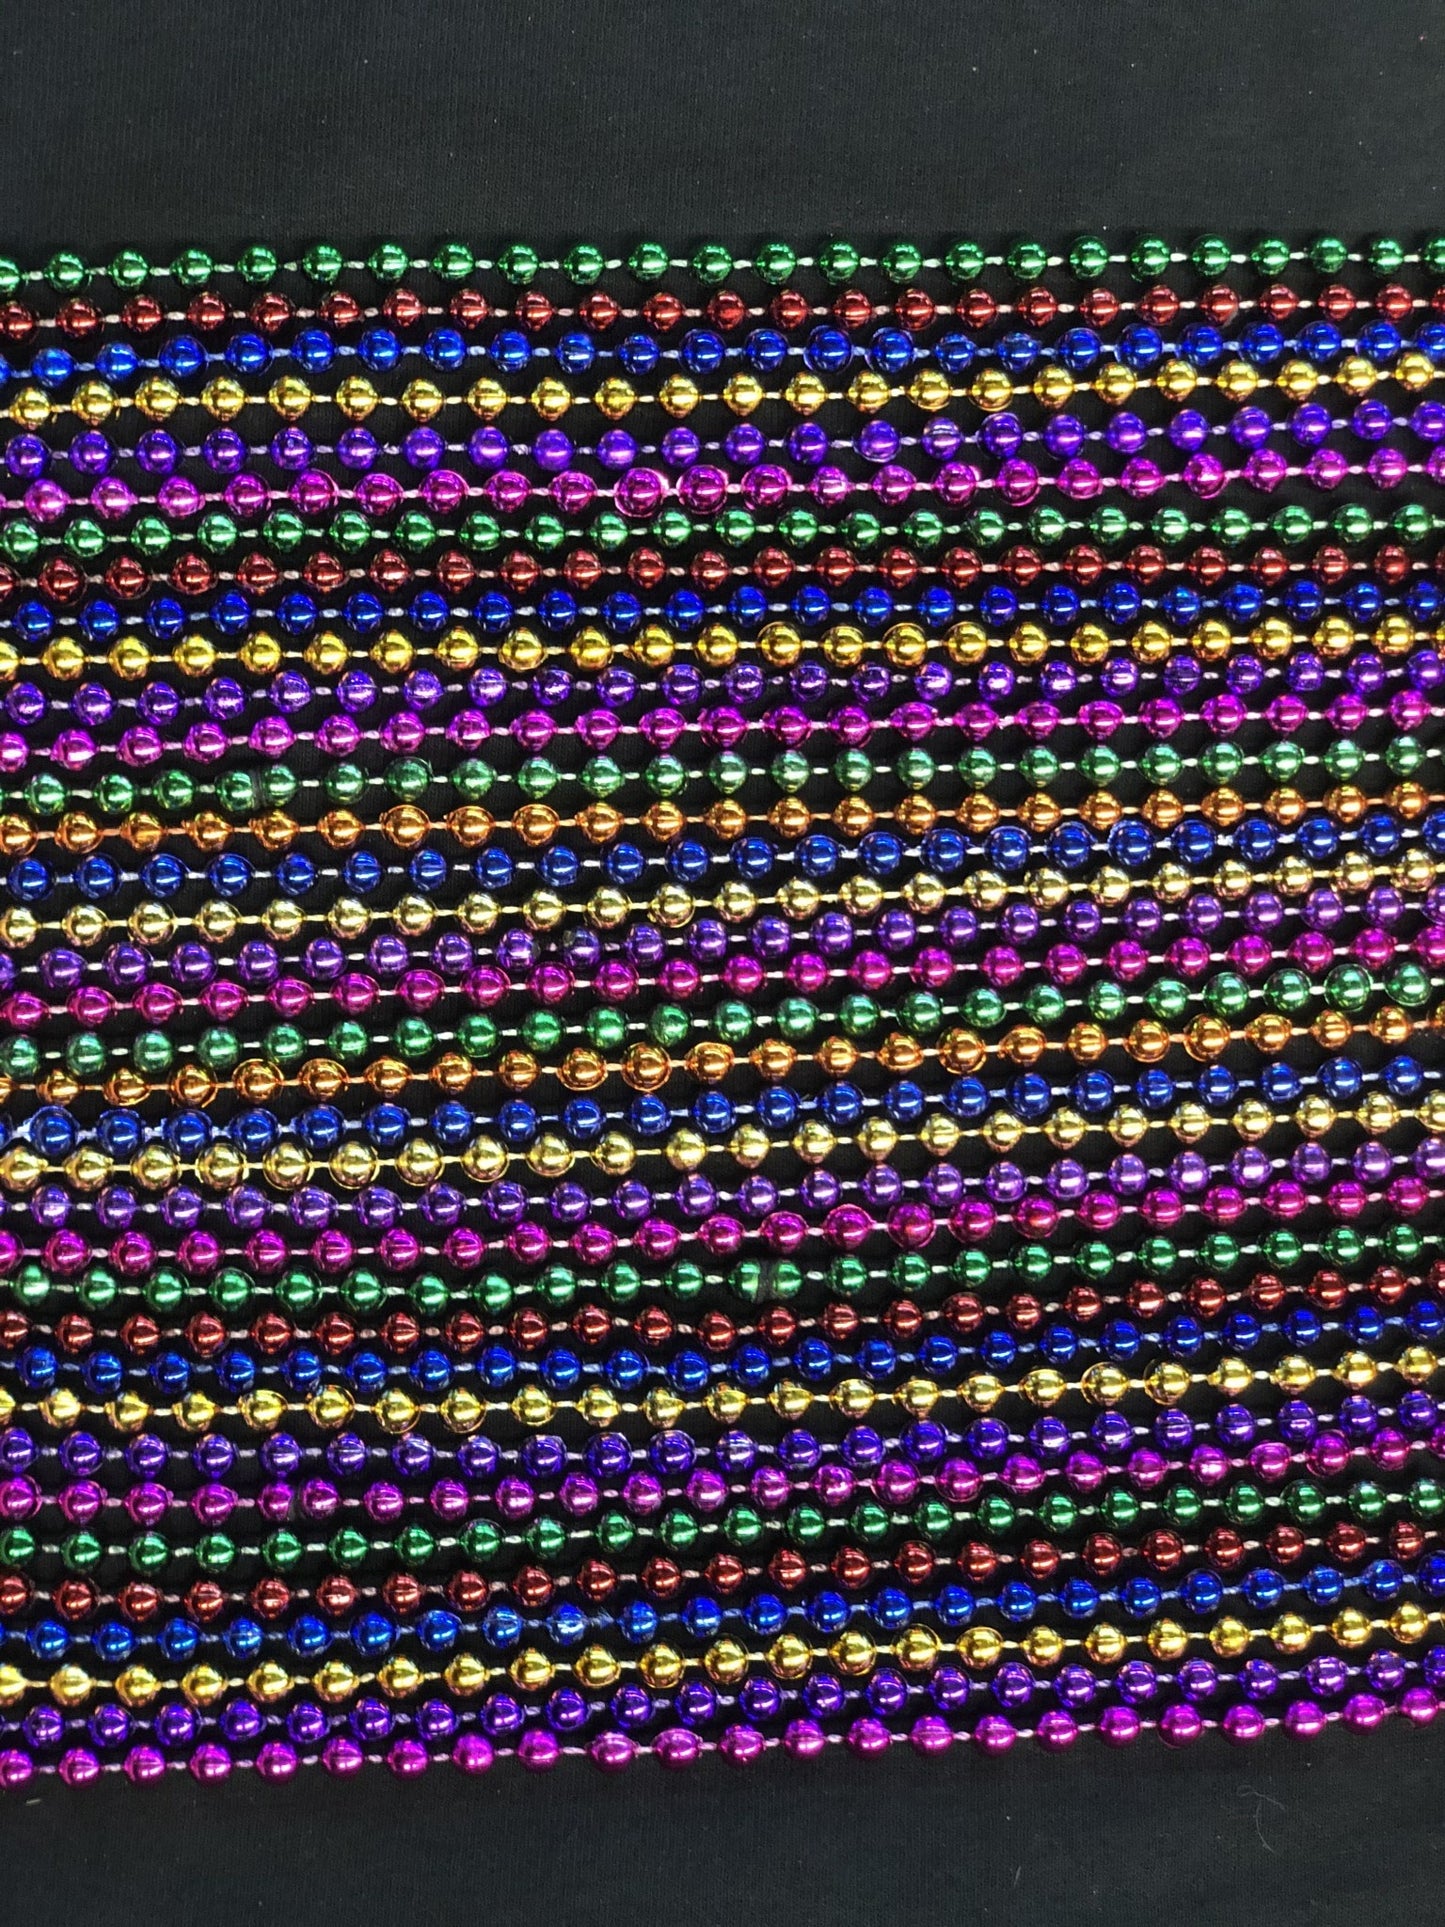 An over the top view of different colored beads for Mardi Gras. 